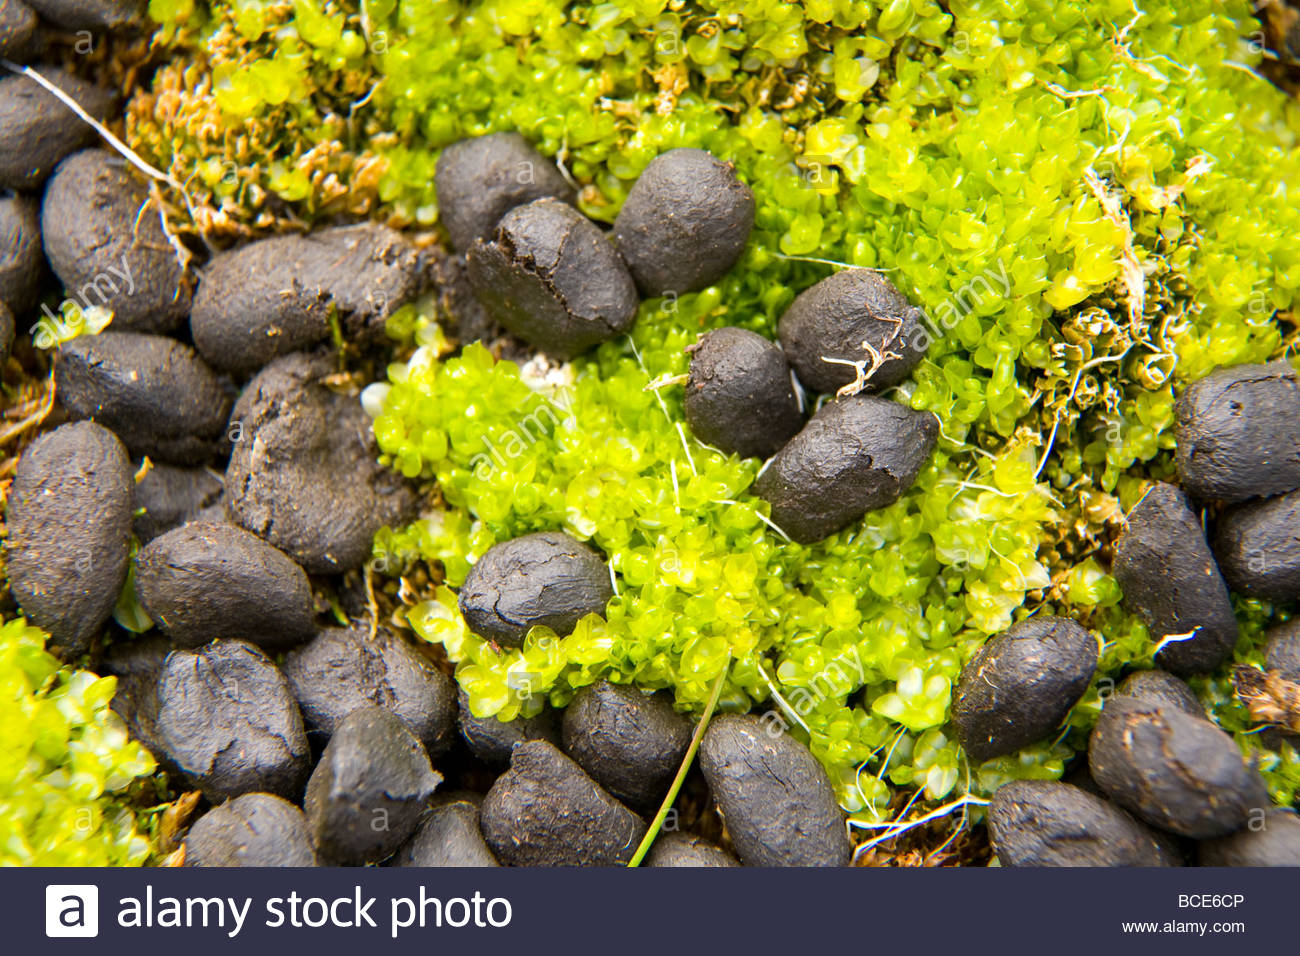 Reindeer droppings dot the moss in the tundra. Stock Photo